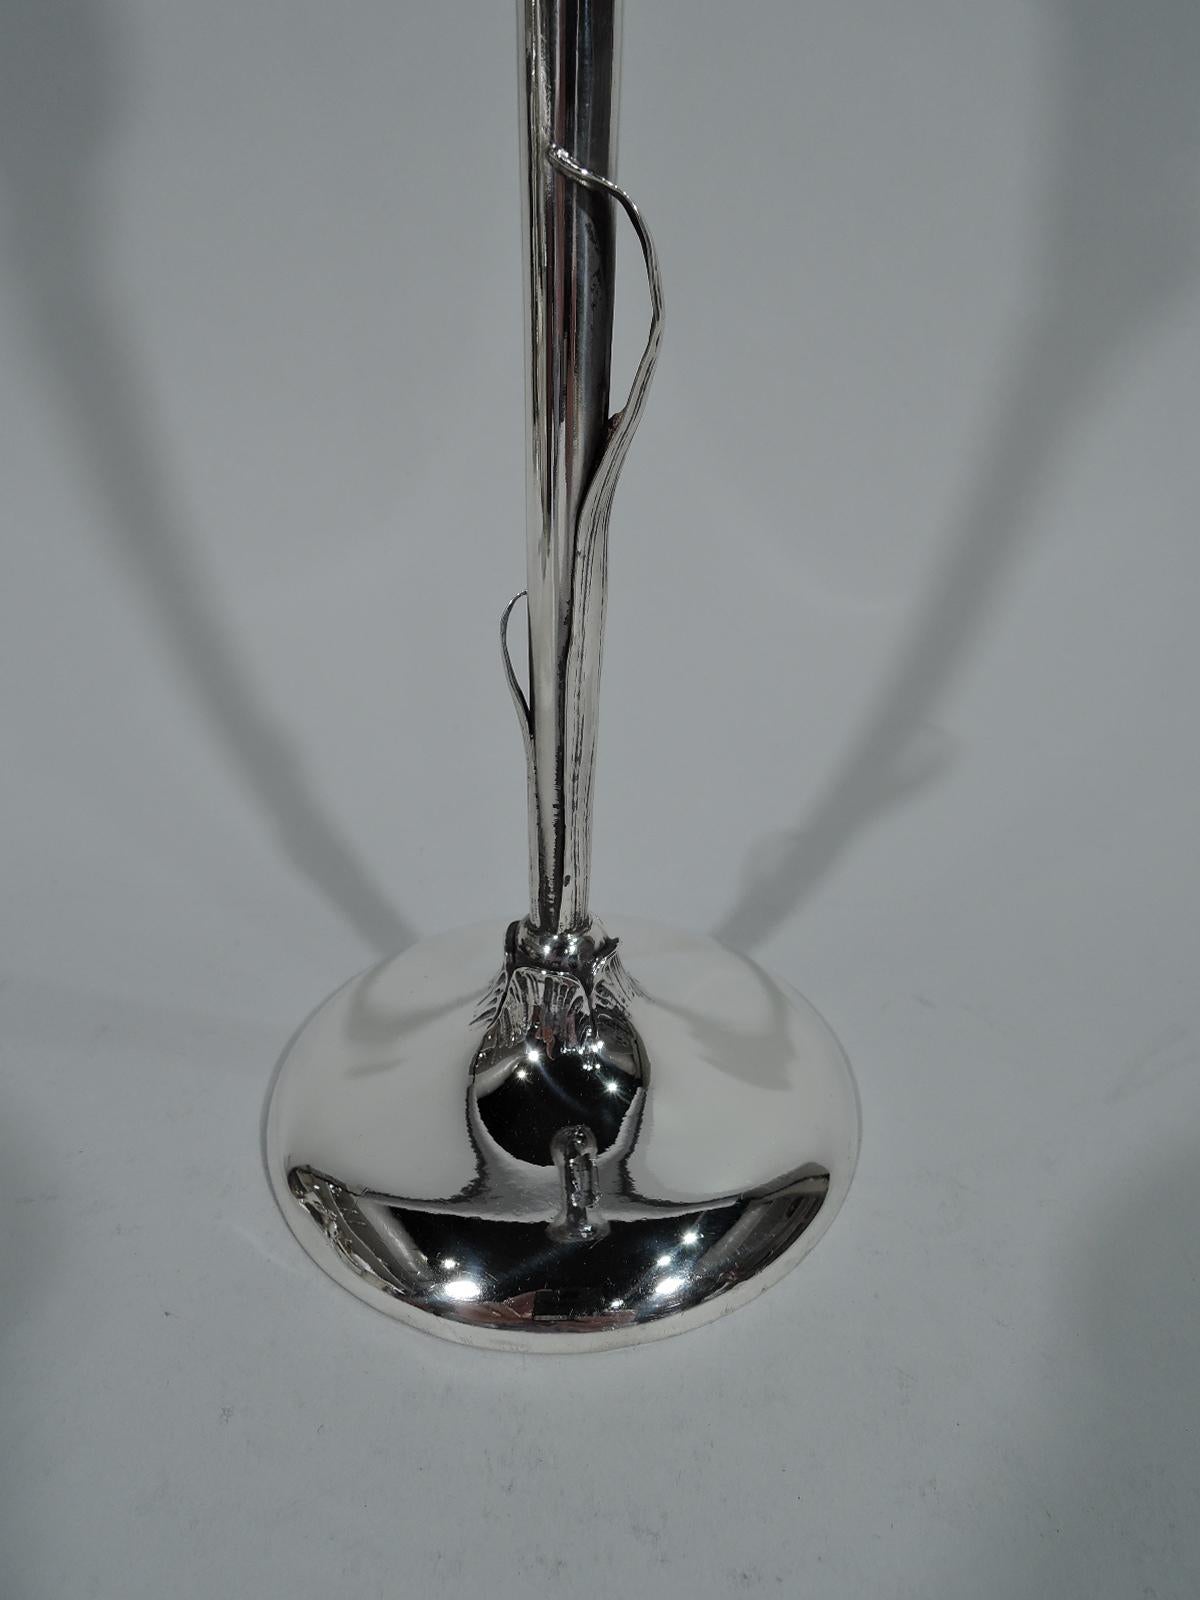 19th Century Antique American Aesthetic Japonesque Sterling Silver Calla Lily Vase